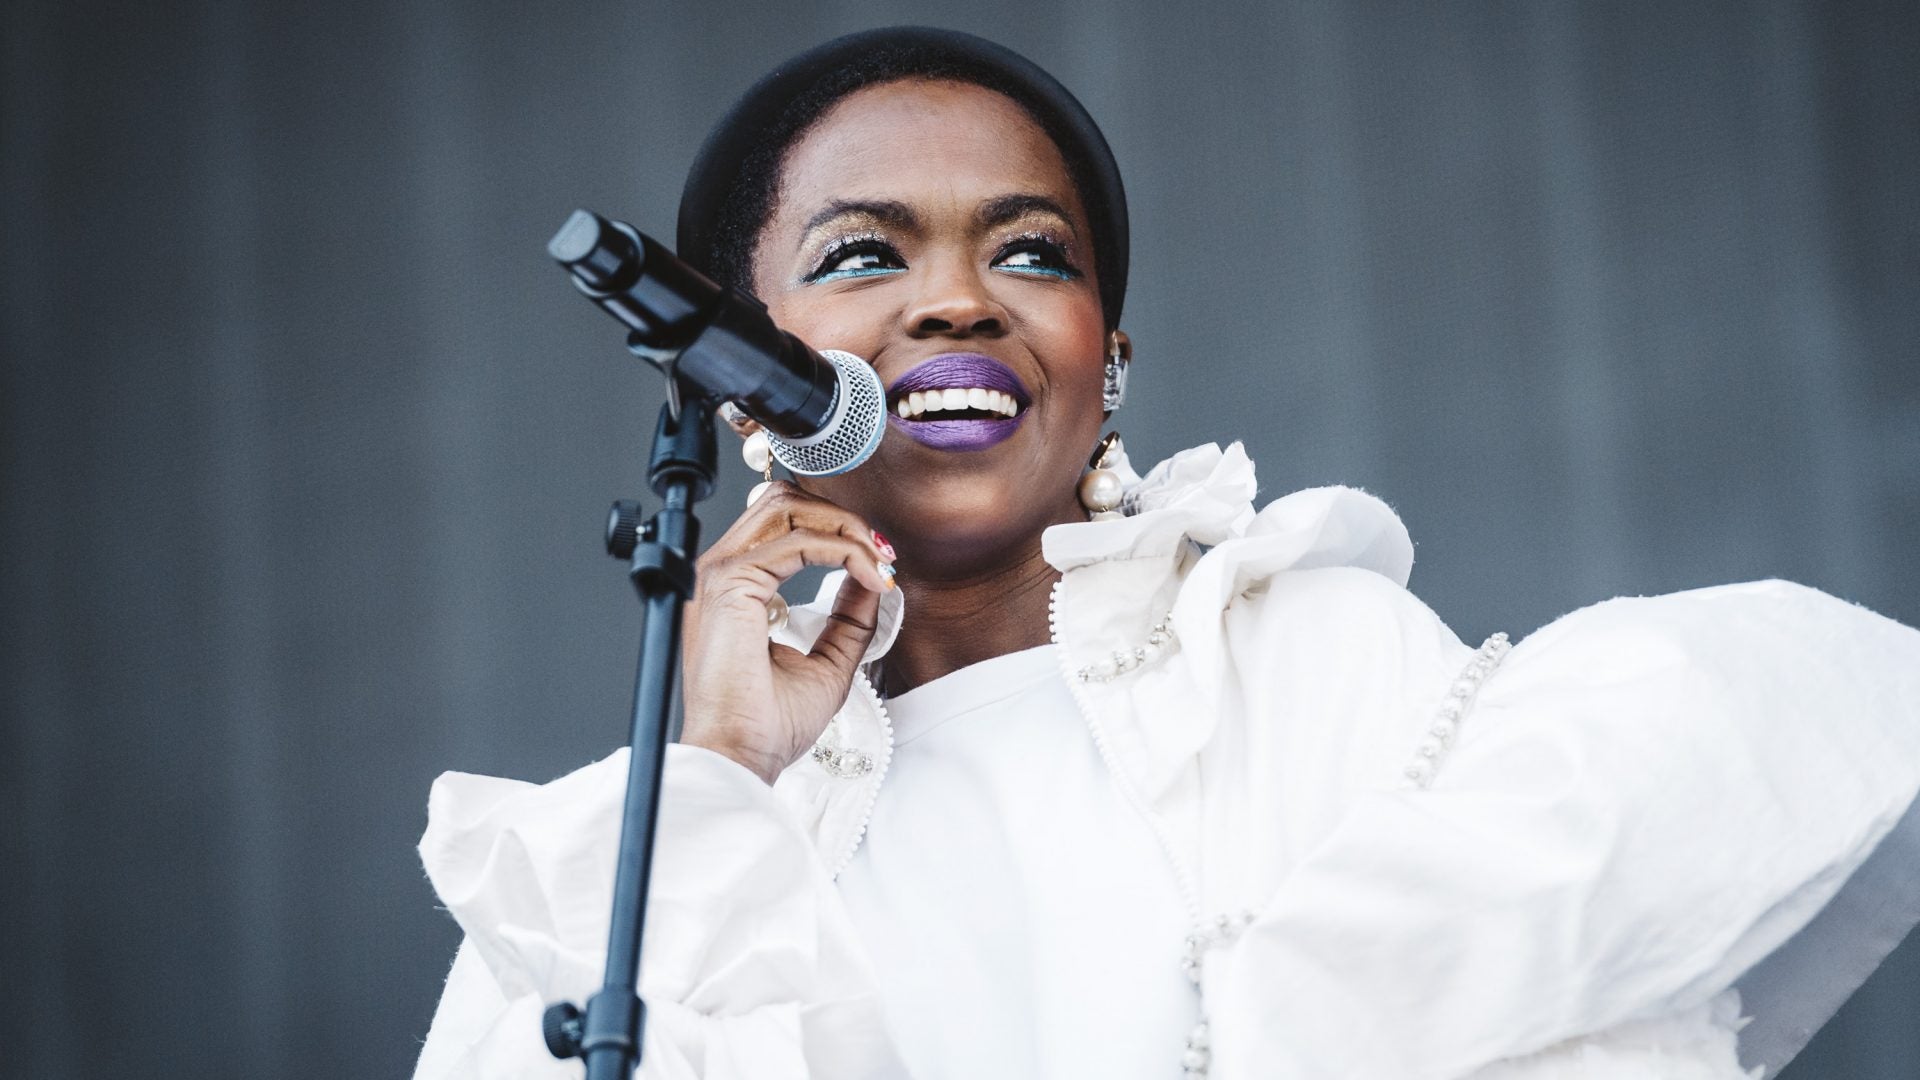 Lauryn Hill Reveals Why She Never Released Another Album After 'Miseducation'